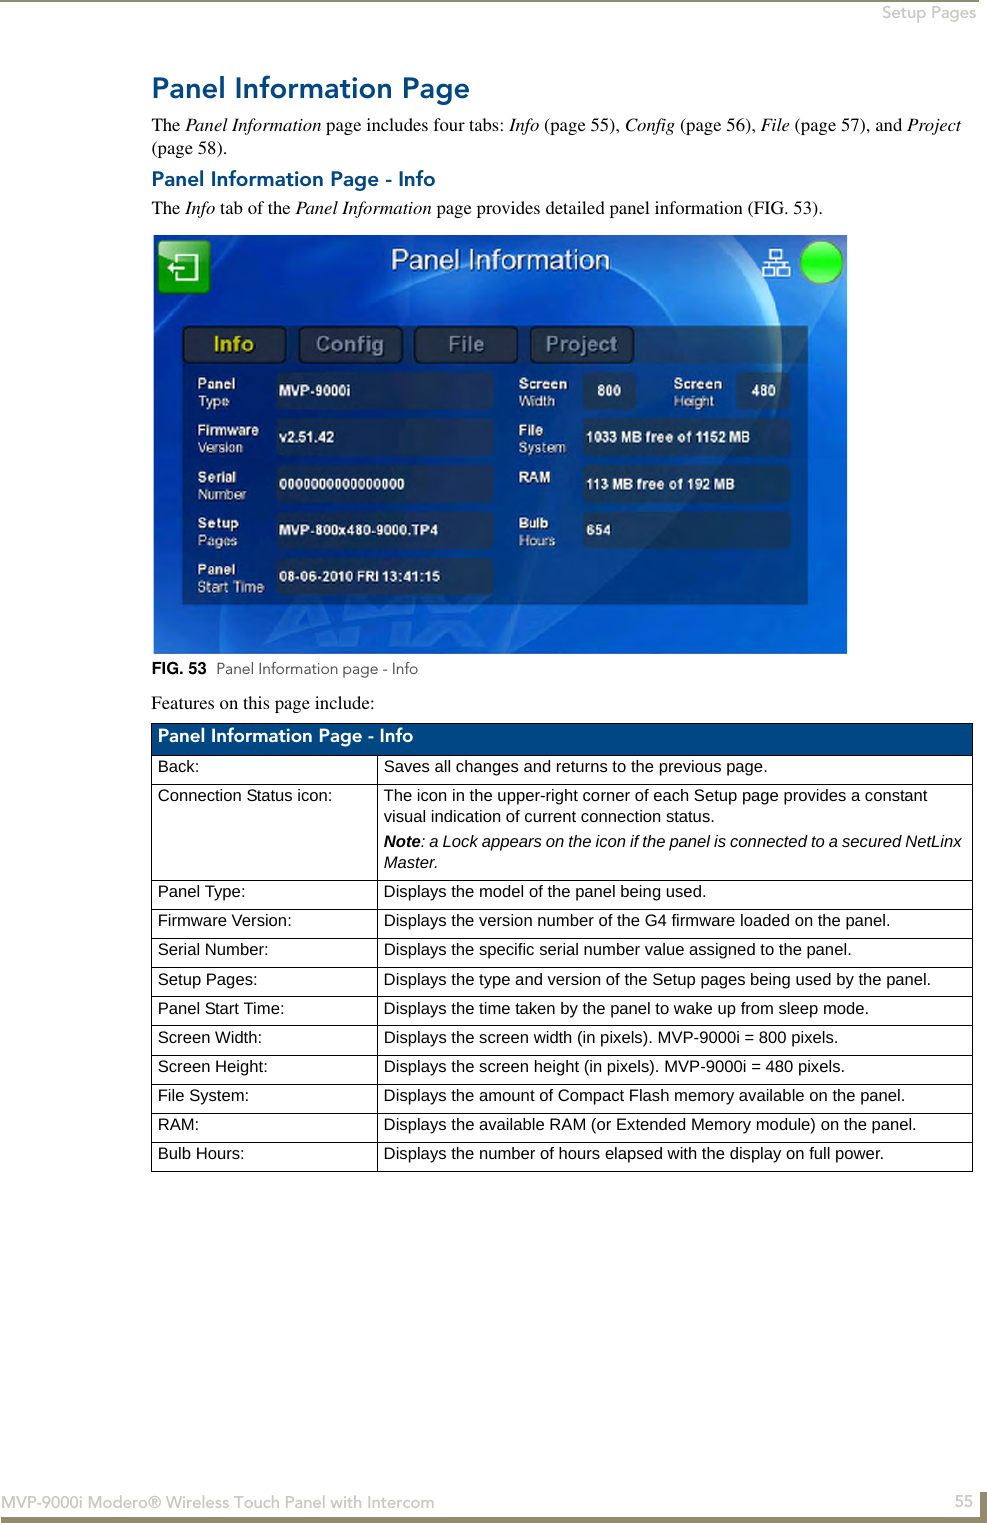 Setup Pages55MVP-9000i Modero® Wireless Touch Panel with IntercomPanel Information PageThe Panel Information page includes four tabs: Info (page 55), Config (page 56), File (page 57), and Project (page 58).Panel Information Page - InfoThe Info tab of the Panel Information page provides detailed panel information (FIG. 53).  Features on this page include:  FIG. 53  Panel Information page - InfoPanel Information Page - Info Back: Saves all changes and returns to the previous page.Connection Status icon: The icon in the upper-right corner of each Setup page provides a constant visual indication of current connection status.Note: a Lock appears on the icon if the panel is connected to a secured NetLinx Master.Panel Type: Displays the model of the panel being used.Firmware Version: Displays the version number of the G4 firmware loaded on the panel.Serial Number: Displays the specific serial number value assigned to the panel.Setup Pages: Displays the type and version of the Setup pages being used by the panel.Panel Start Time: Displays the time taken by the panel to wake up from sleep mode.Screen Width: Displays the screen width (in pixels). MVP-9000i = 800 pixels.Screen Height: Displays the screen height (in pixels). MVP-9000i = 480 pixels.File System: Displays the amount of Compact Flash memory available on the panel.RAM: Displays the available RAM (or Extended Memory module) on the panel.Bulb Hours: Displays the number of hours elapsed with the display on full power.